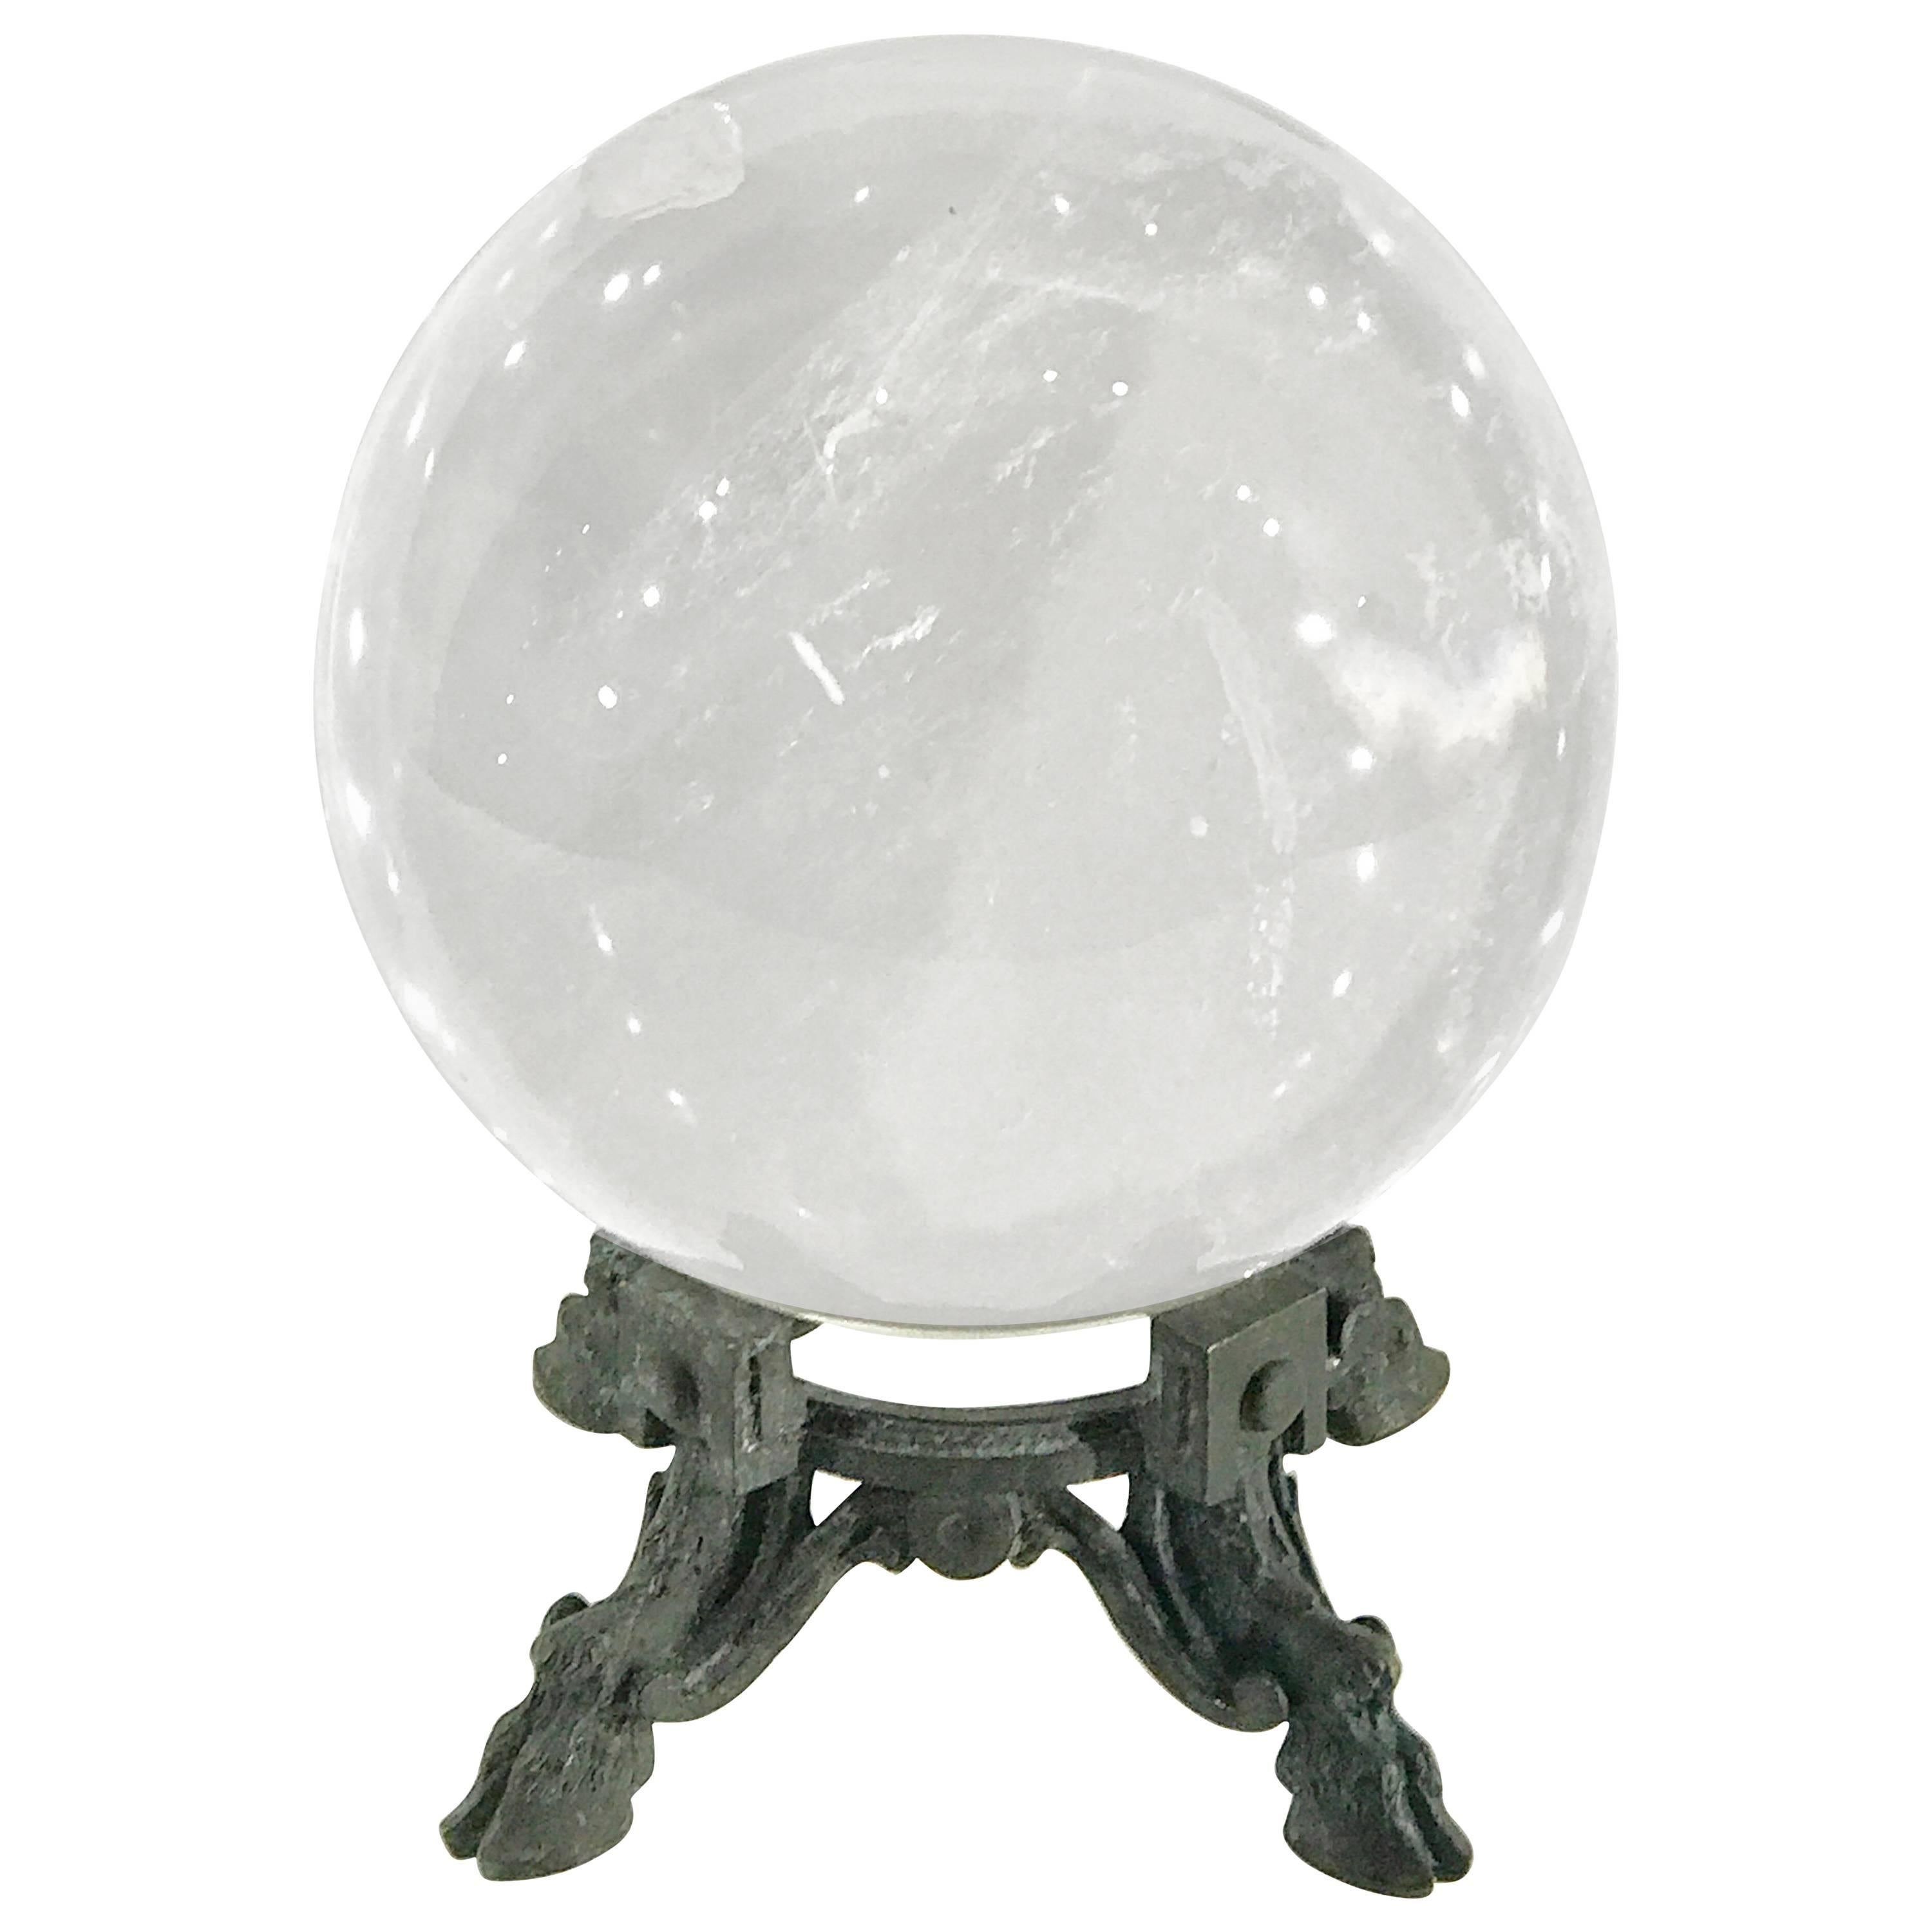 18th-19th Century French Rock Crystal Ball on Louis XIV Verdigris Bronze Stand